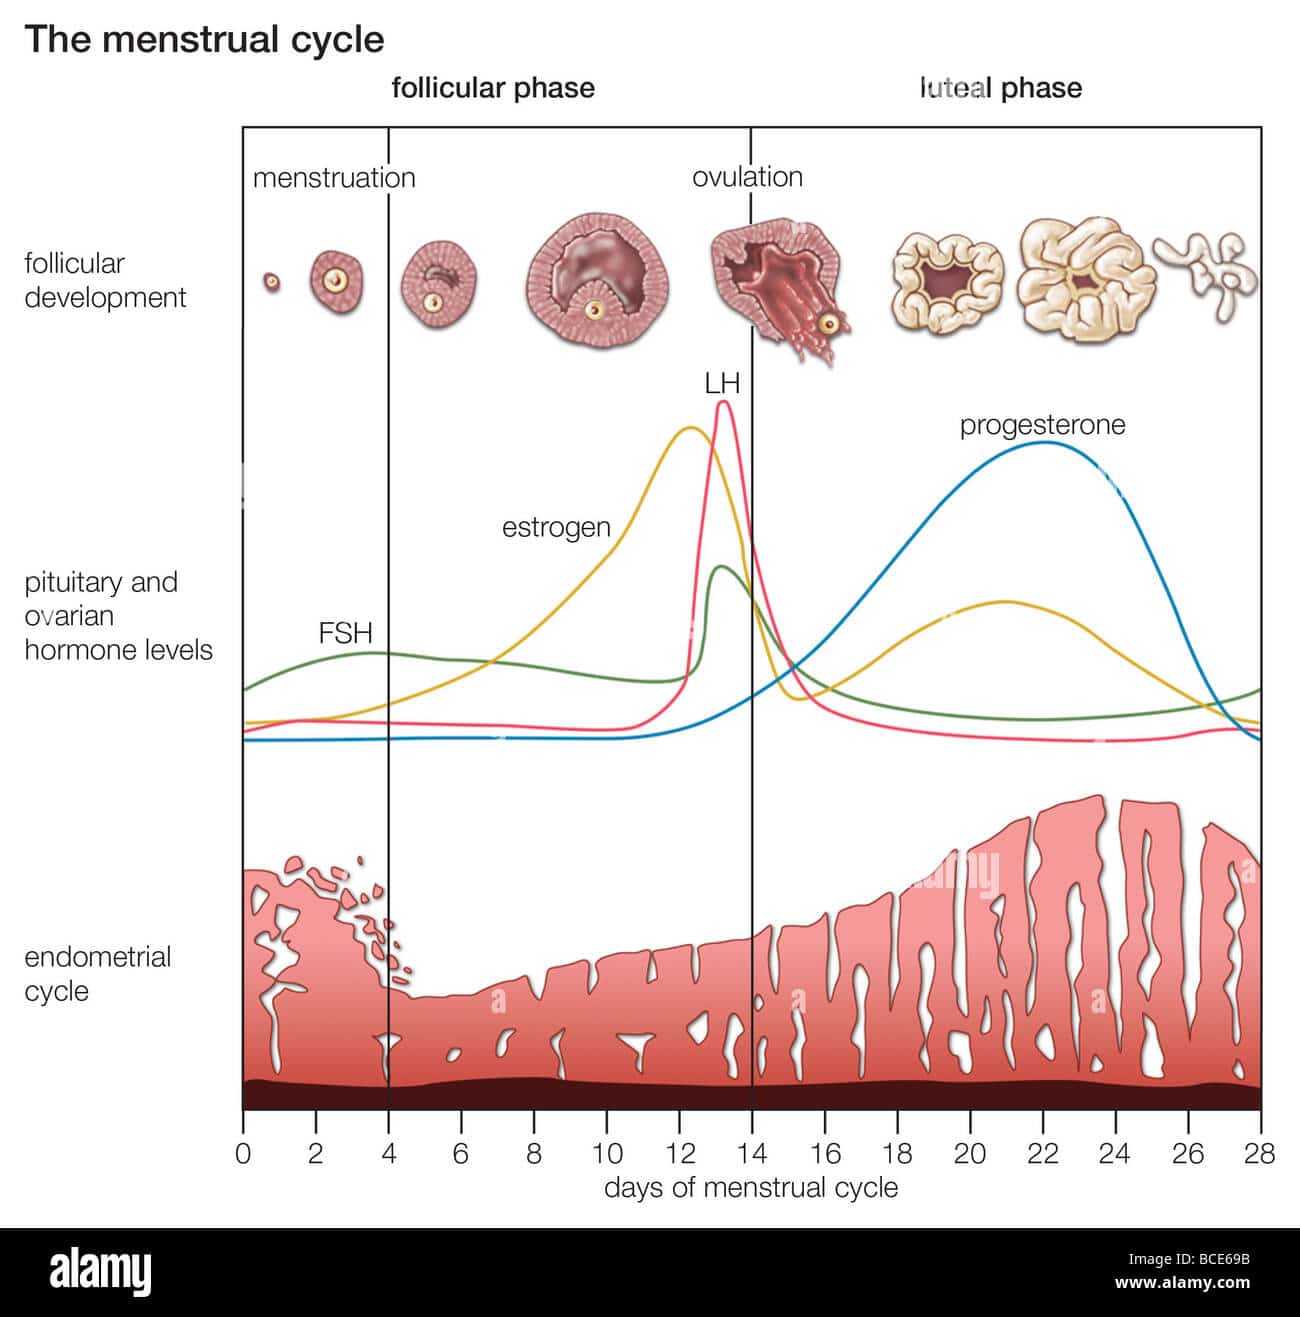 The cyclical changes that occur during the normal menstrual cycle in ...